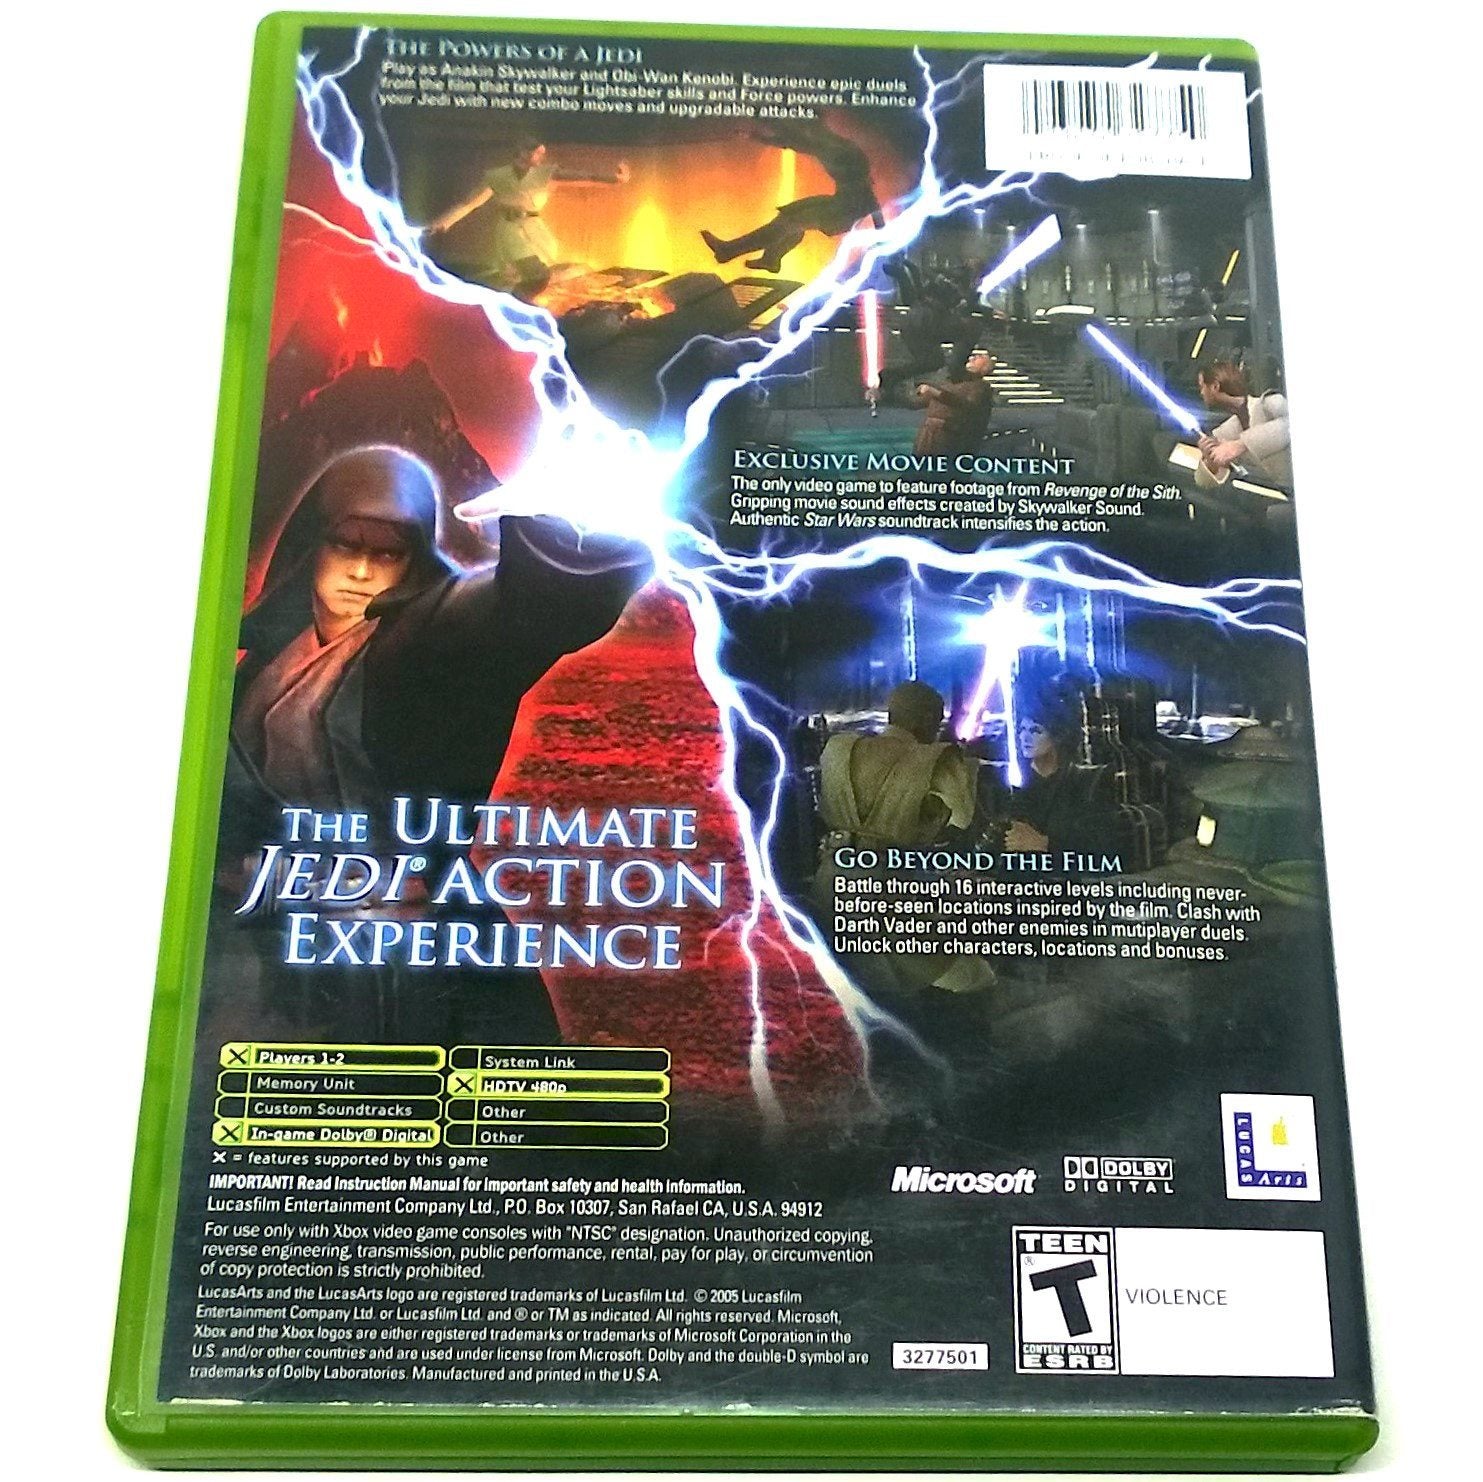 Star Wars Episode III: Revenge of the Sith for Xbox - Back of case